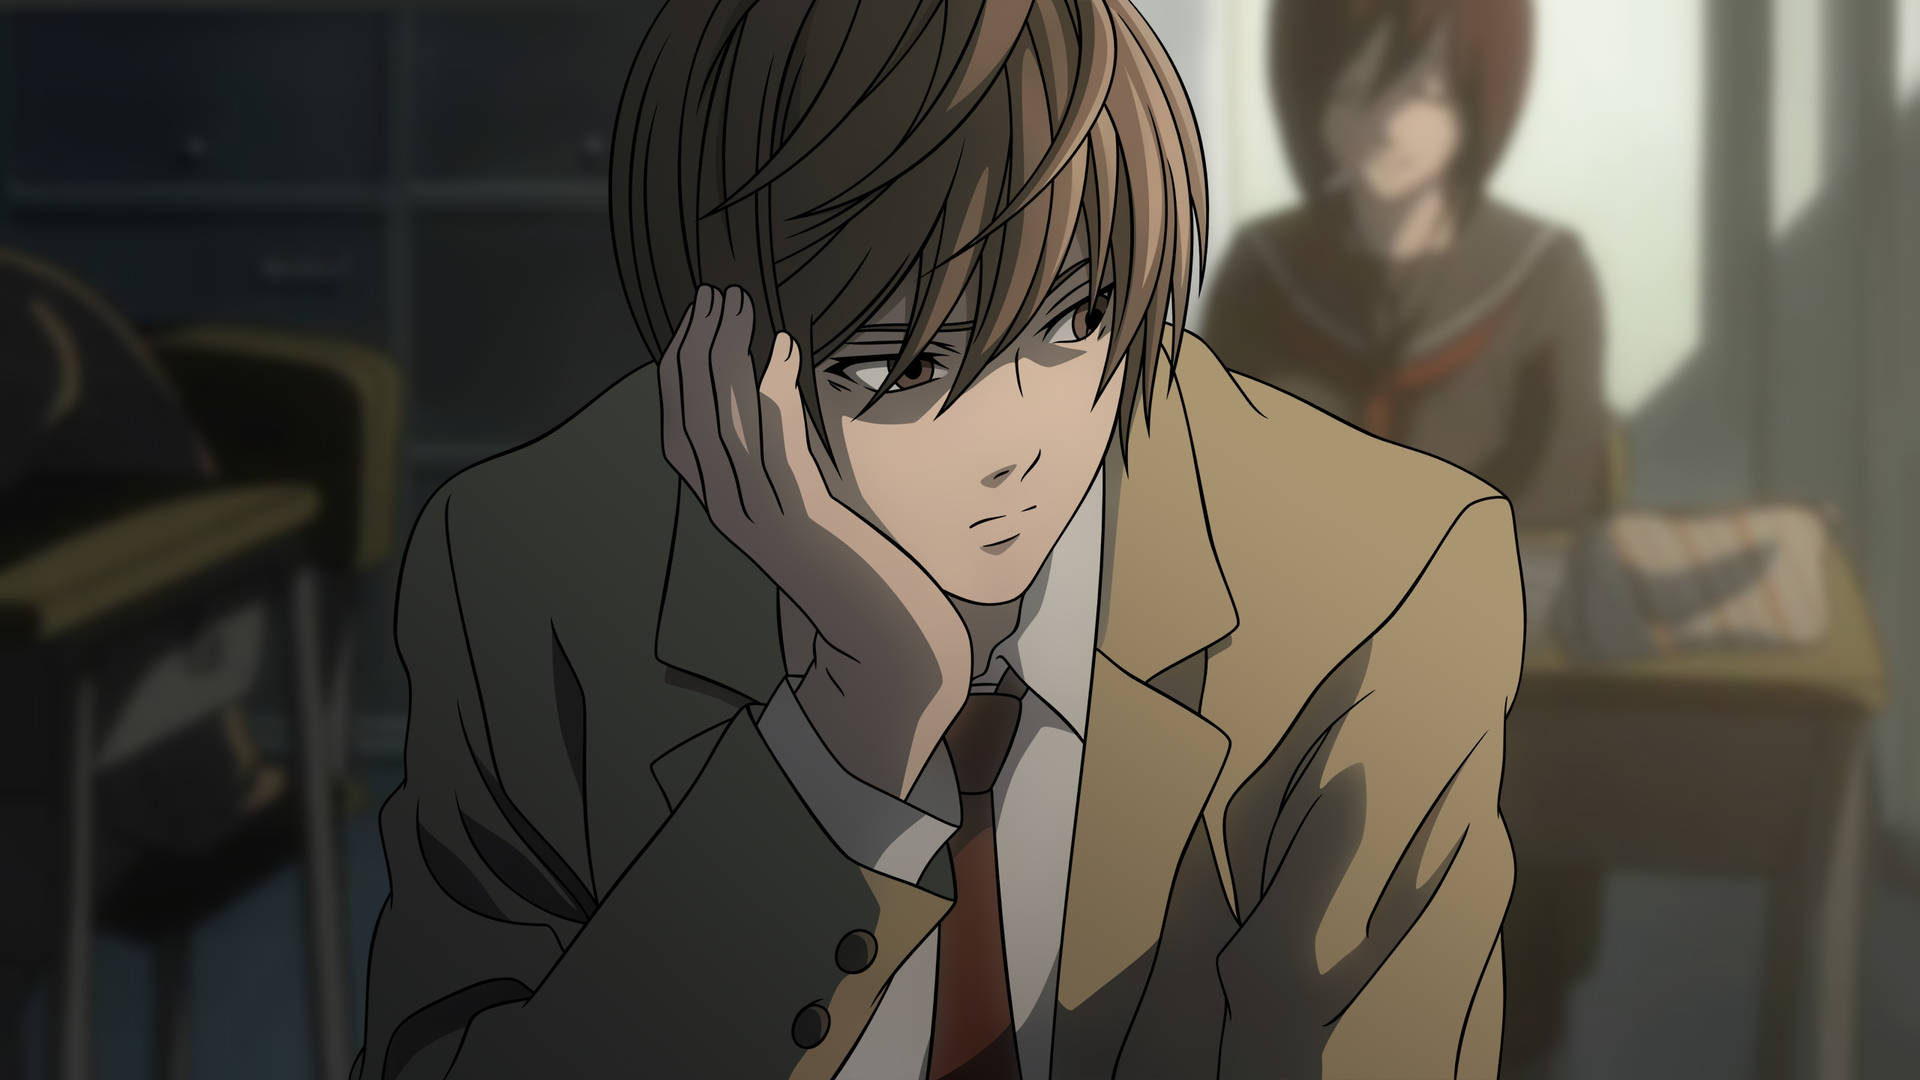 Analyzing Evil: Light Yagami From Death Note - YouTube